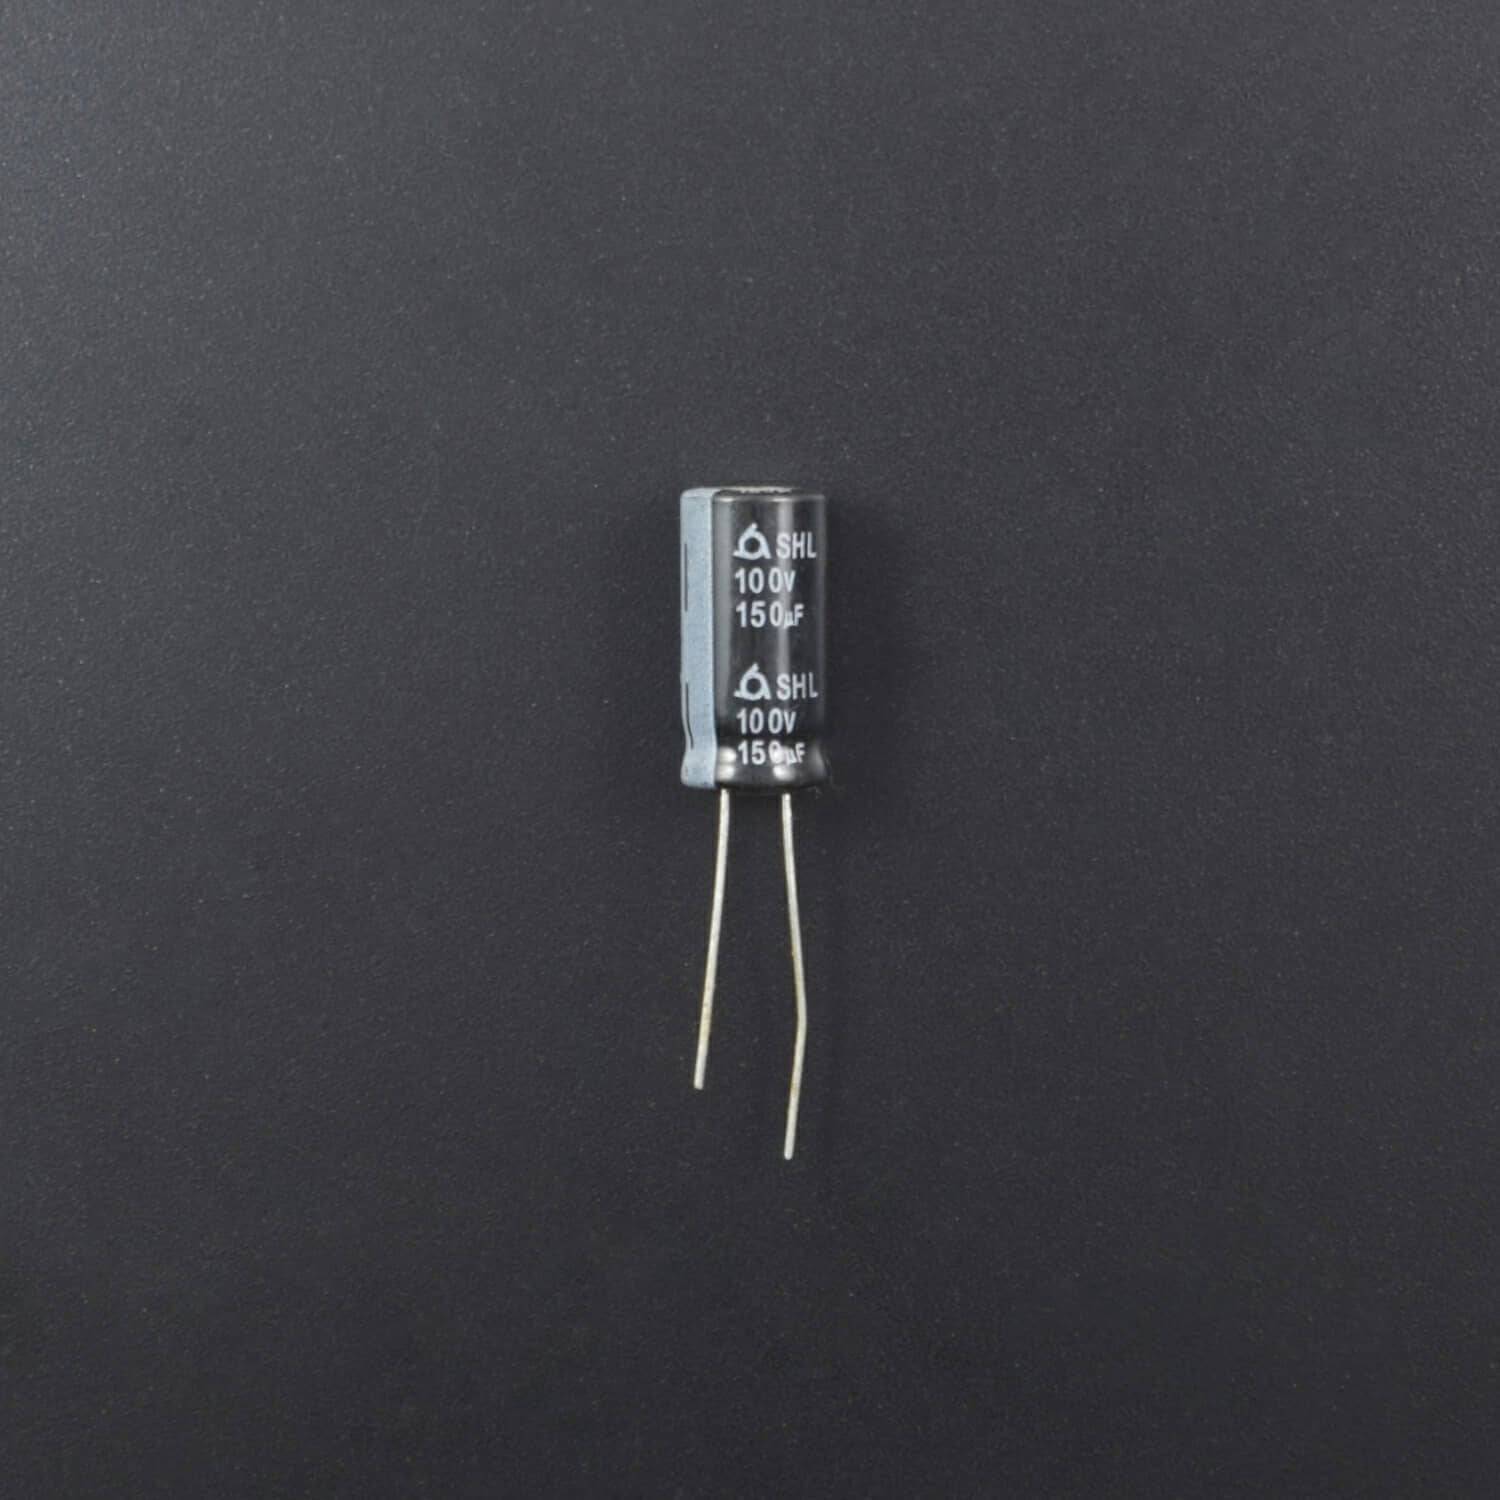 150UF 100V Full Range Of Electrolytic Capacitor - Pack of 5 -RS2020 - REES52